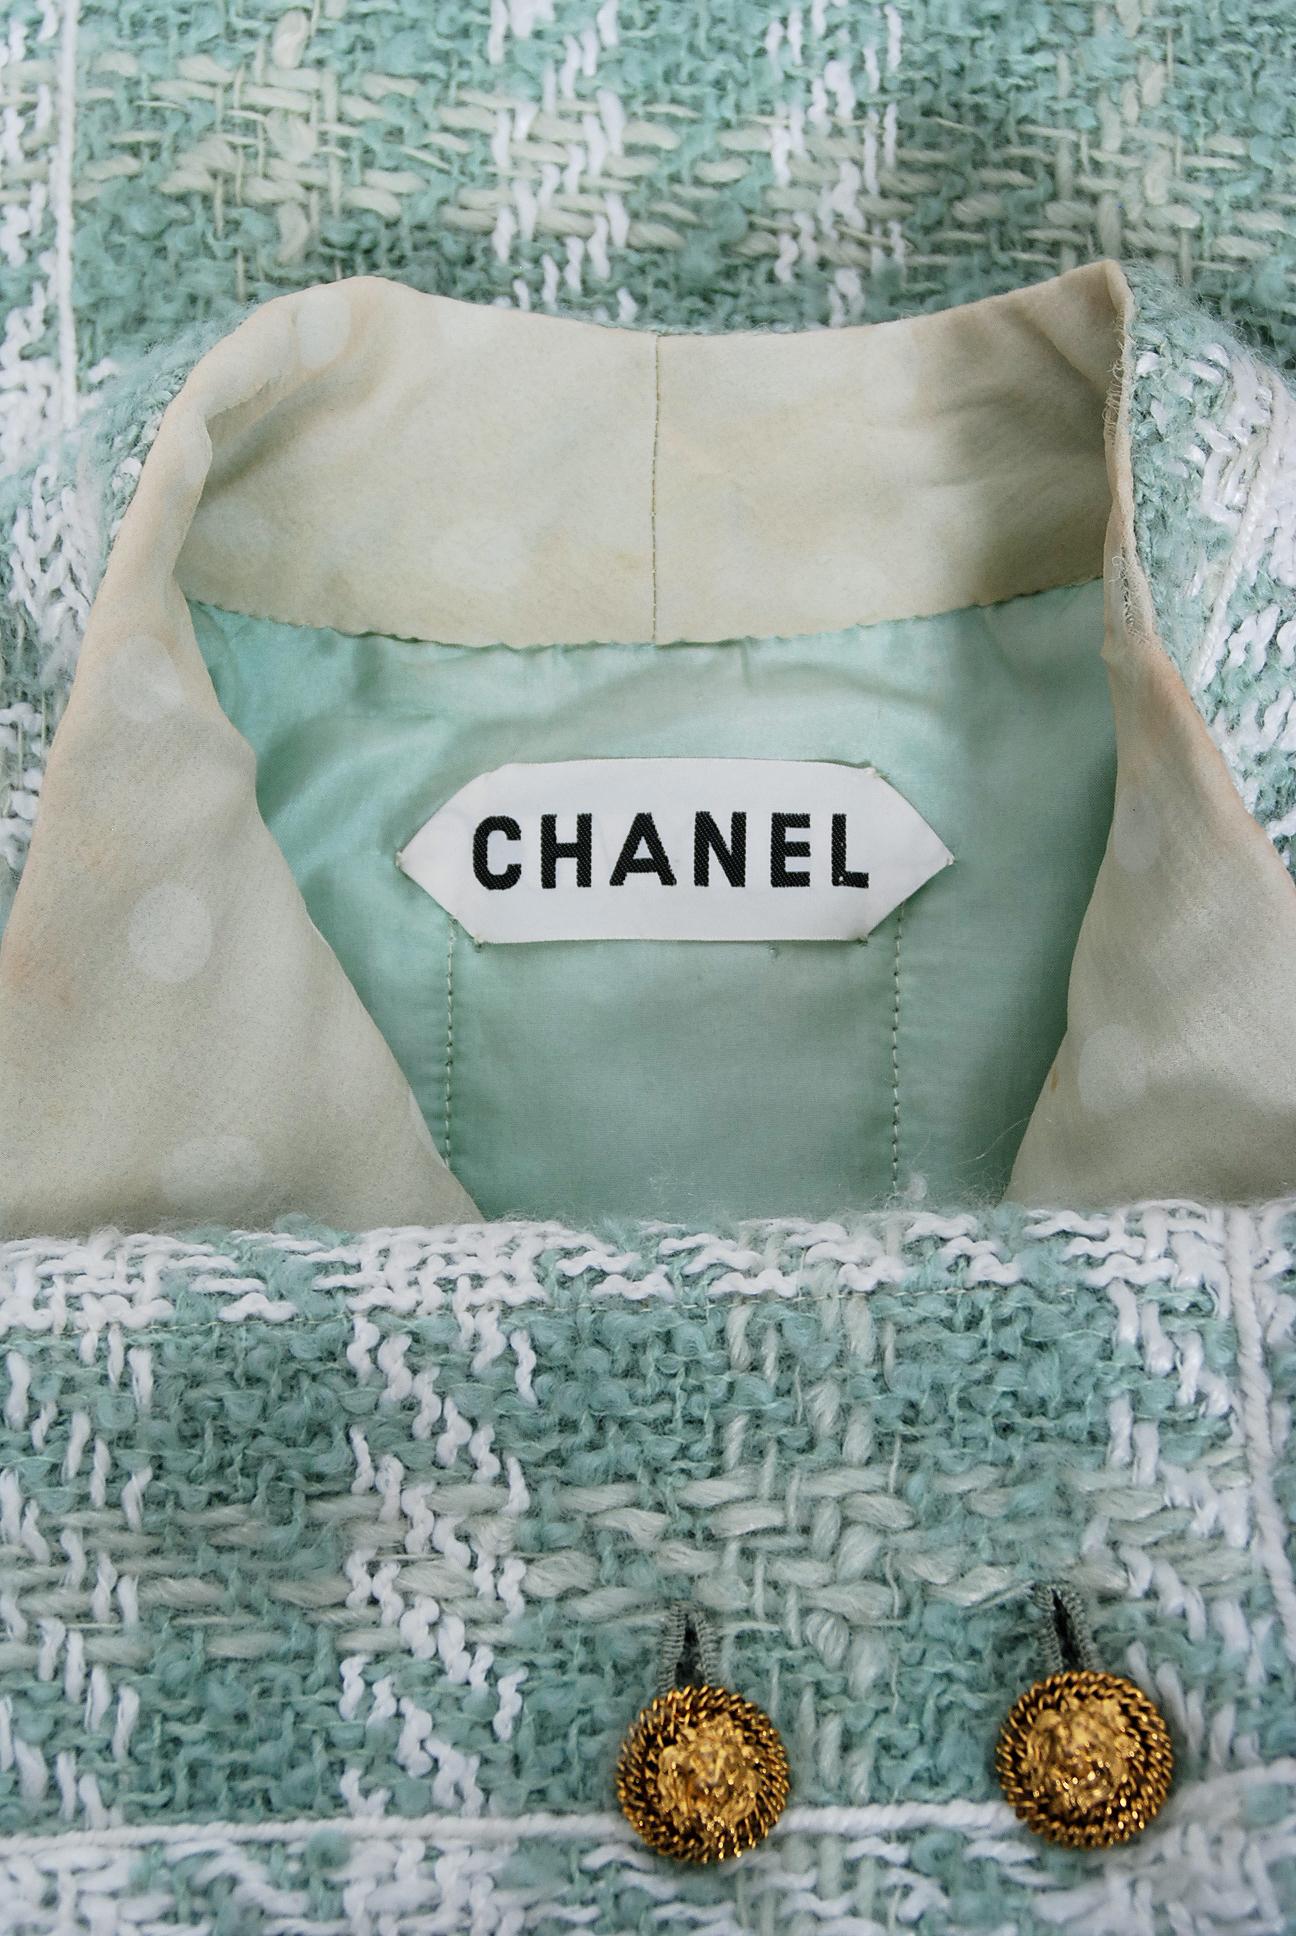 1973 Chanel Haute Couture Documented Seafoam Green Boucle Plaid Wool Coat  3